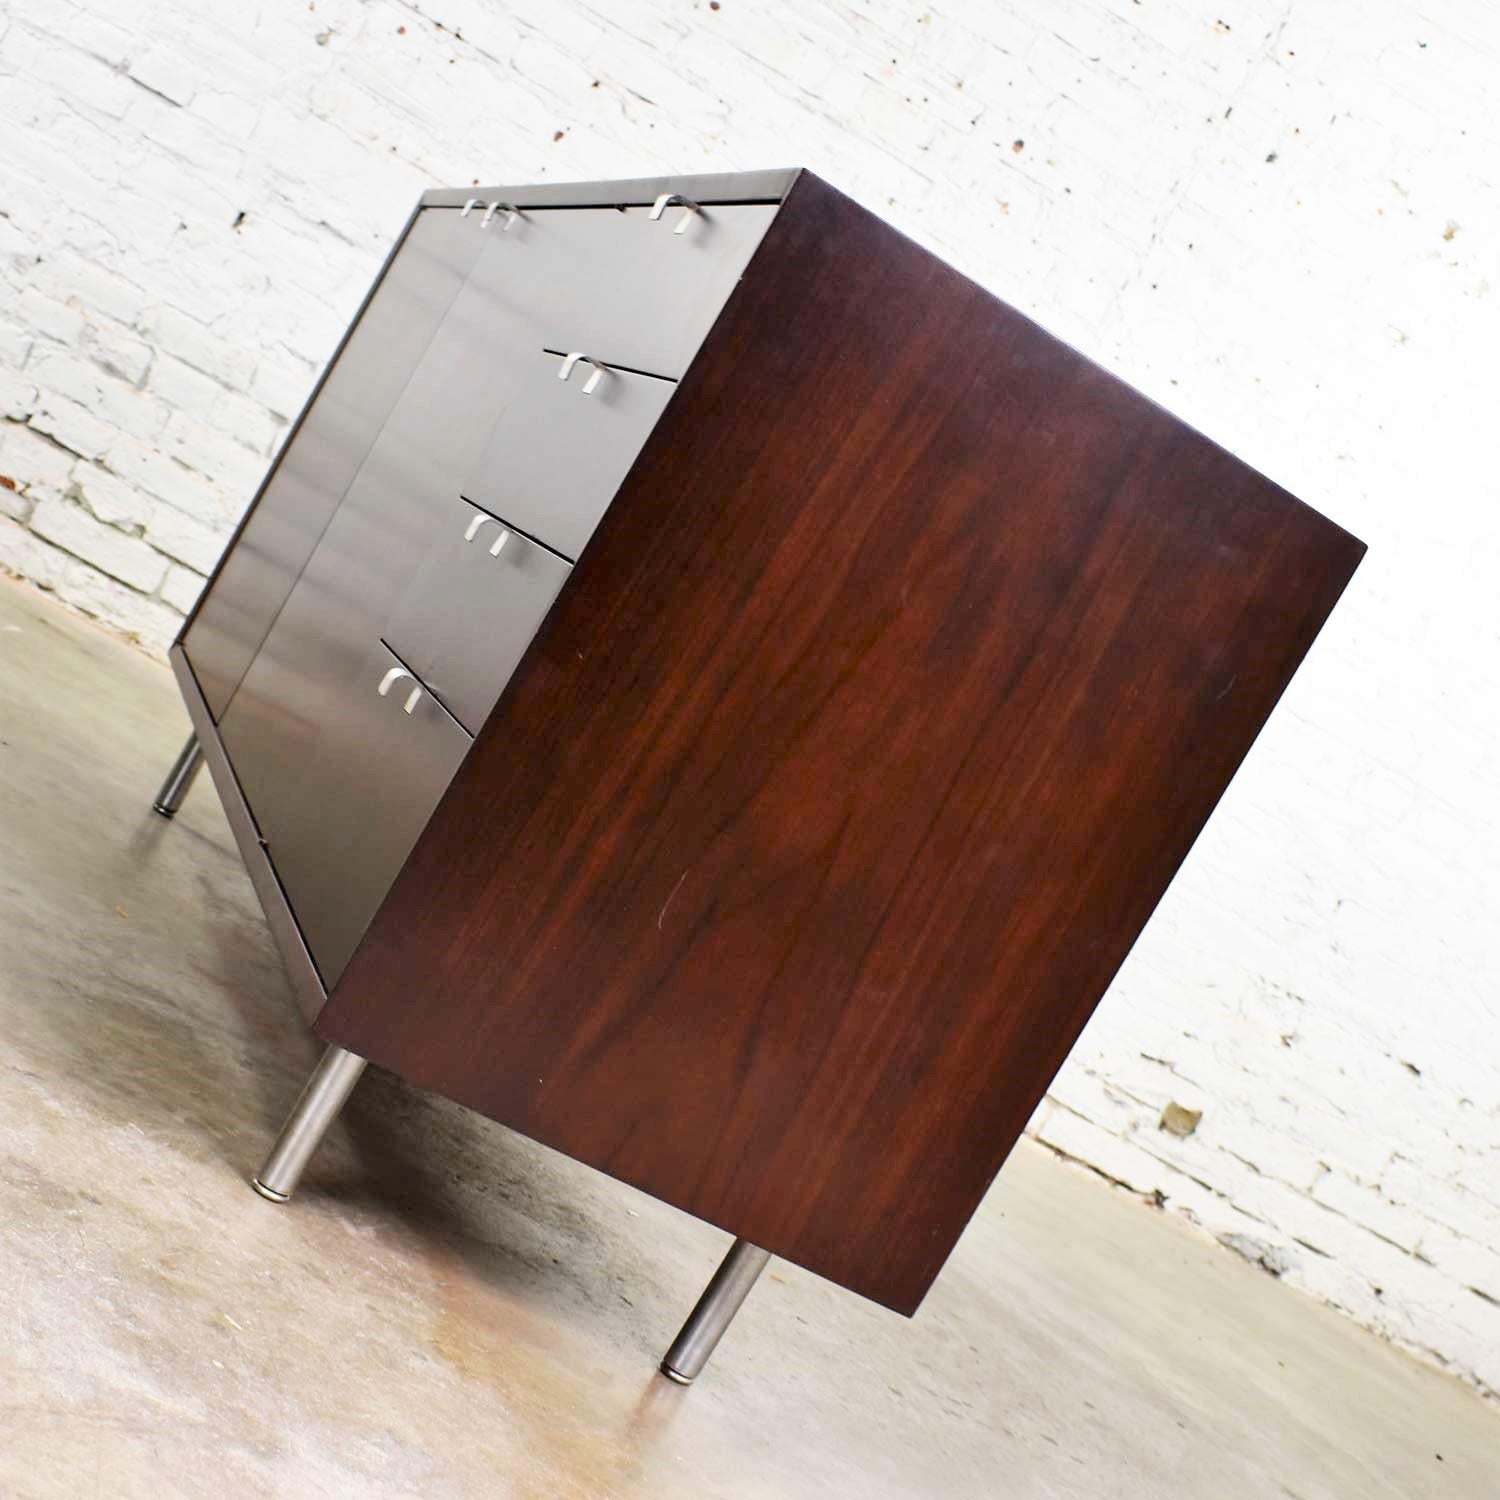 American Early Basic Cabinet Series Walnut Sideboard Credenza by George Nelson for Herman